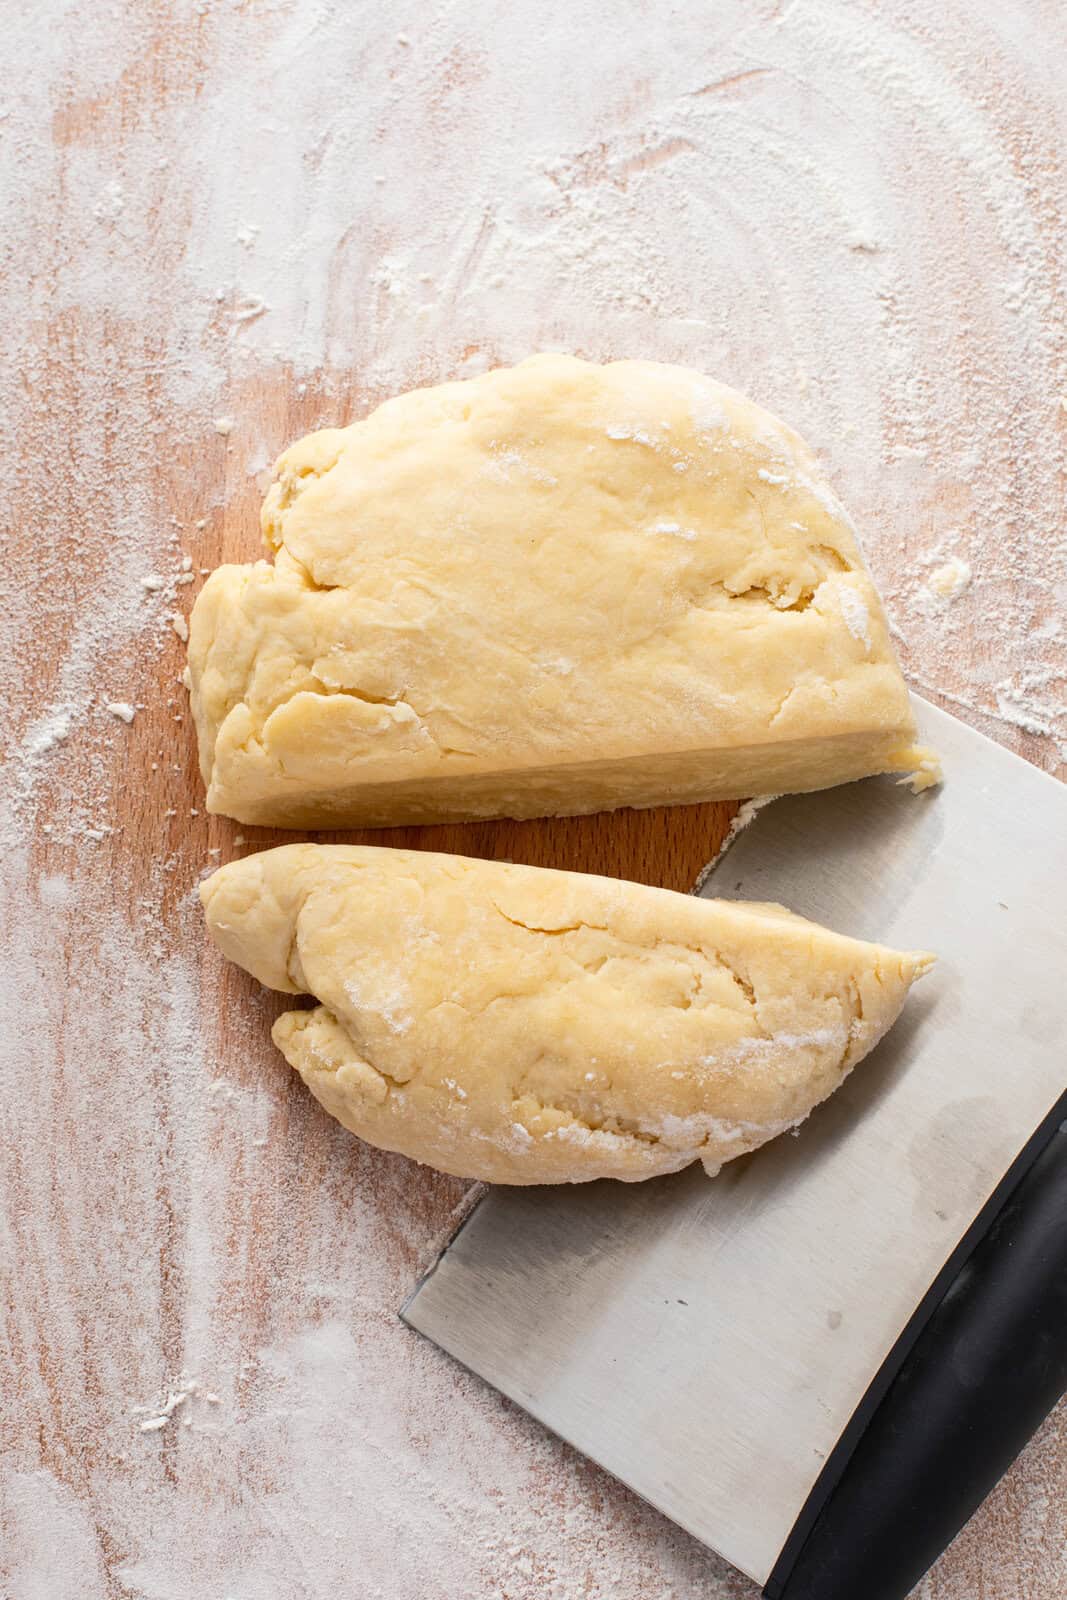 Kneaded dough for cobbler pastry cut into two pieces.